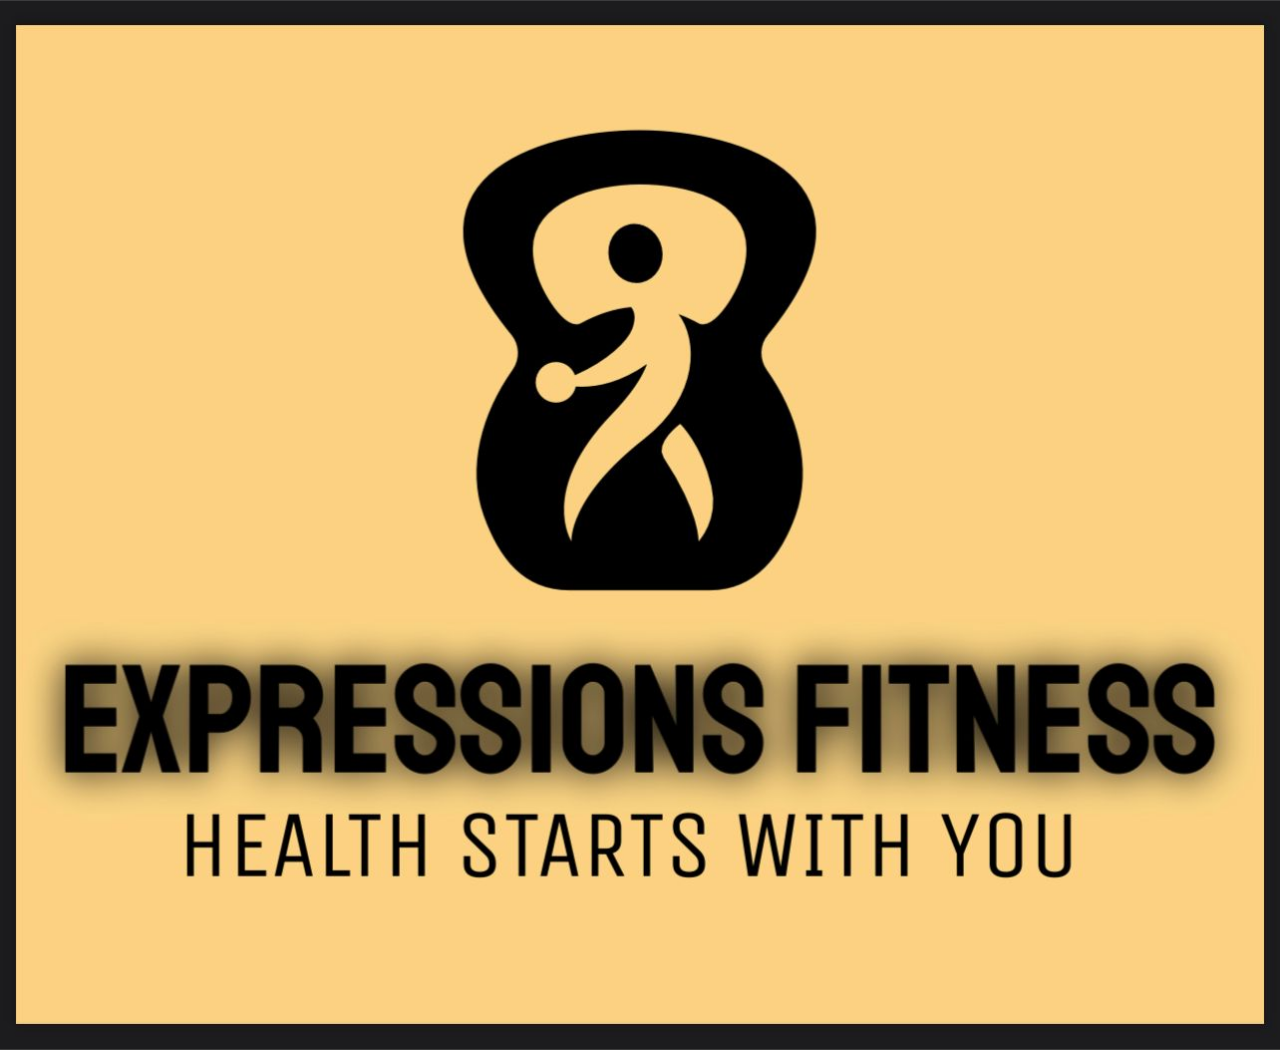 Expressions Fitness's web page